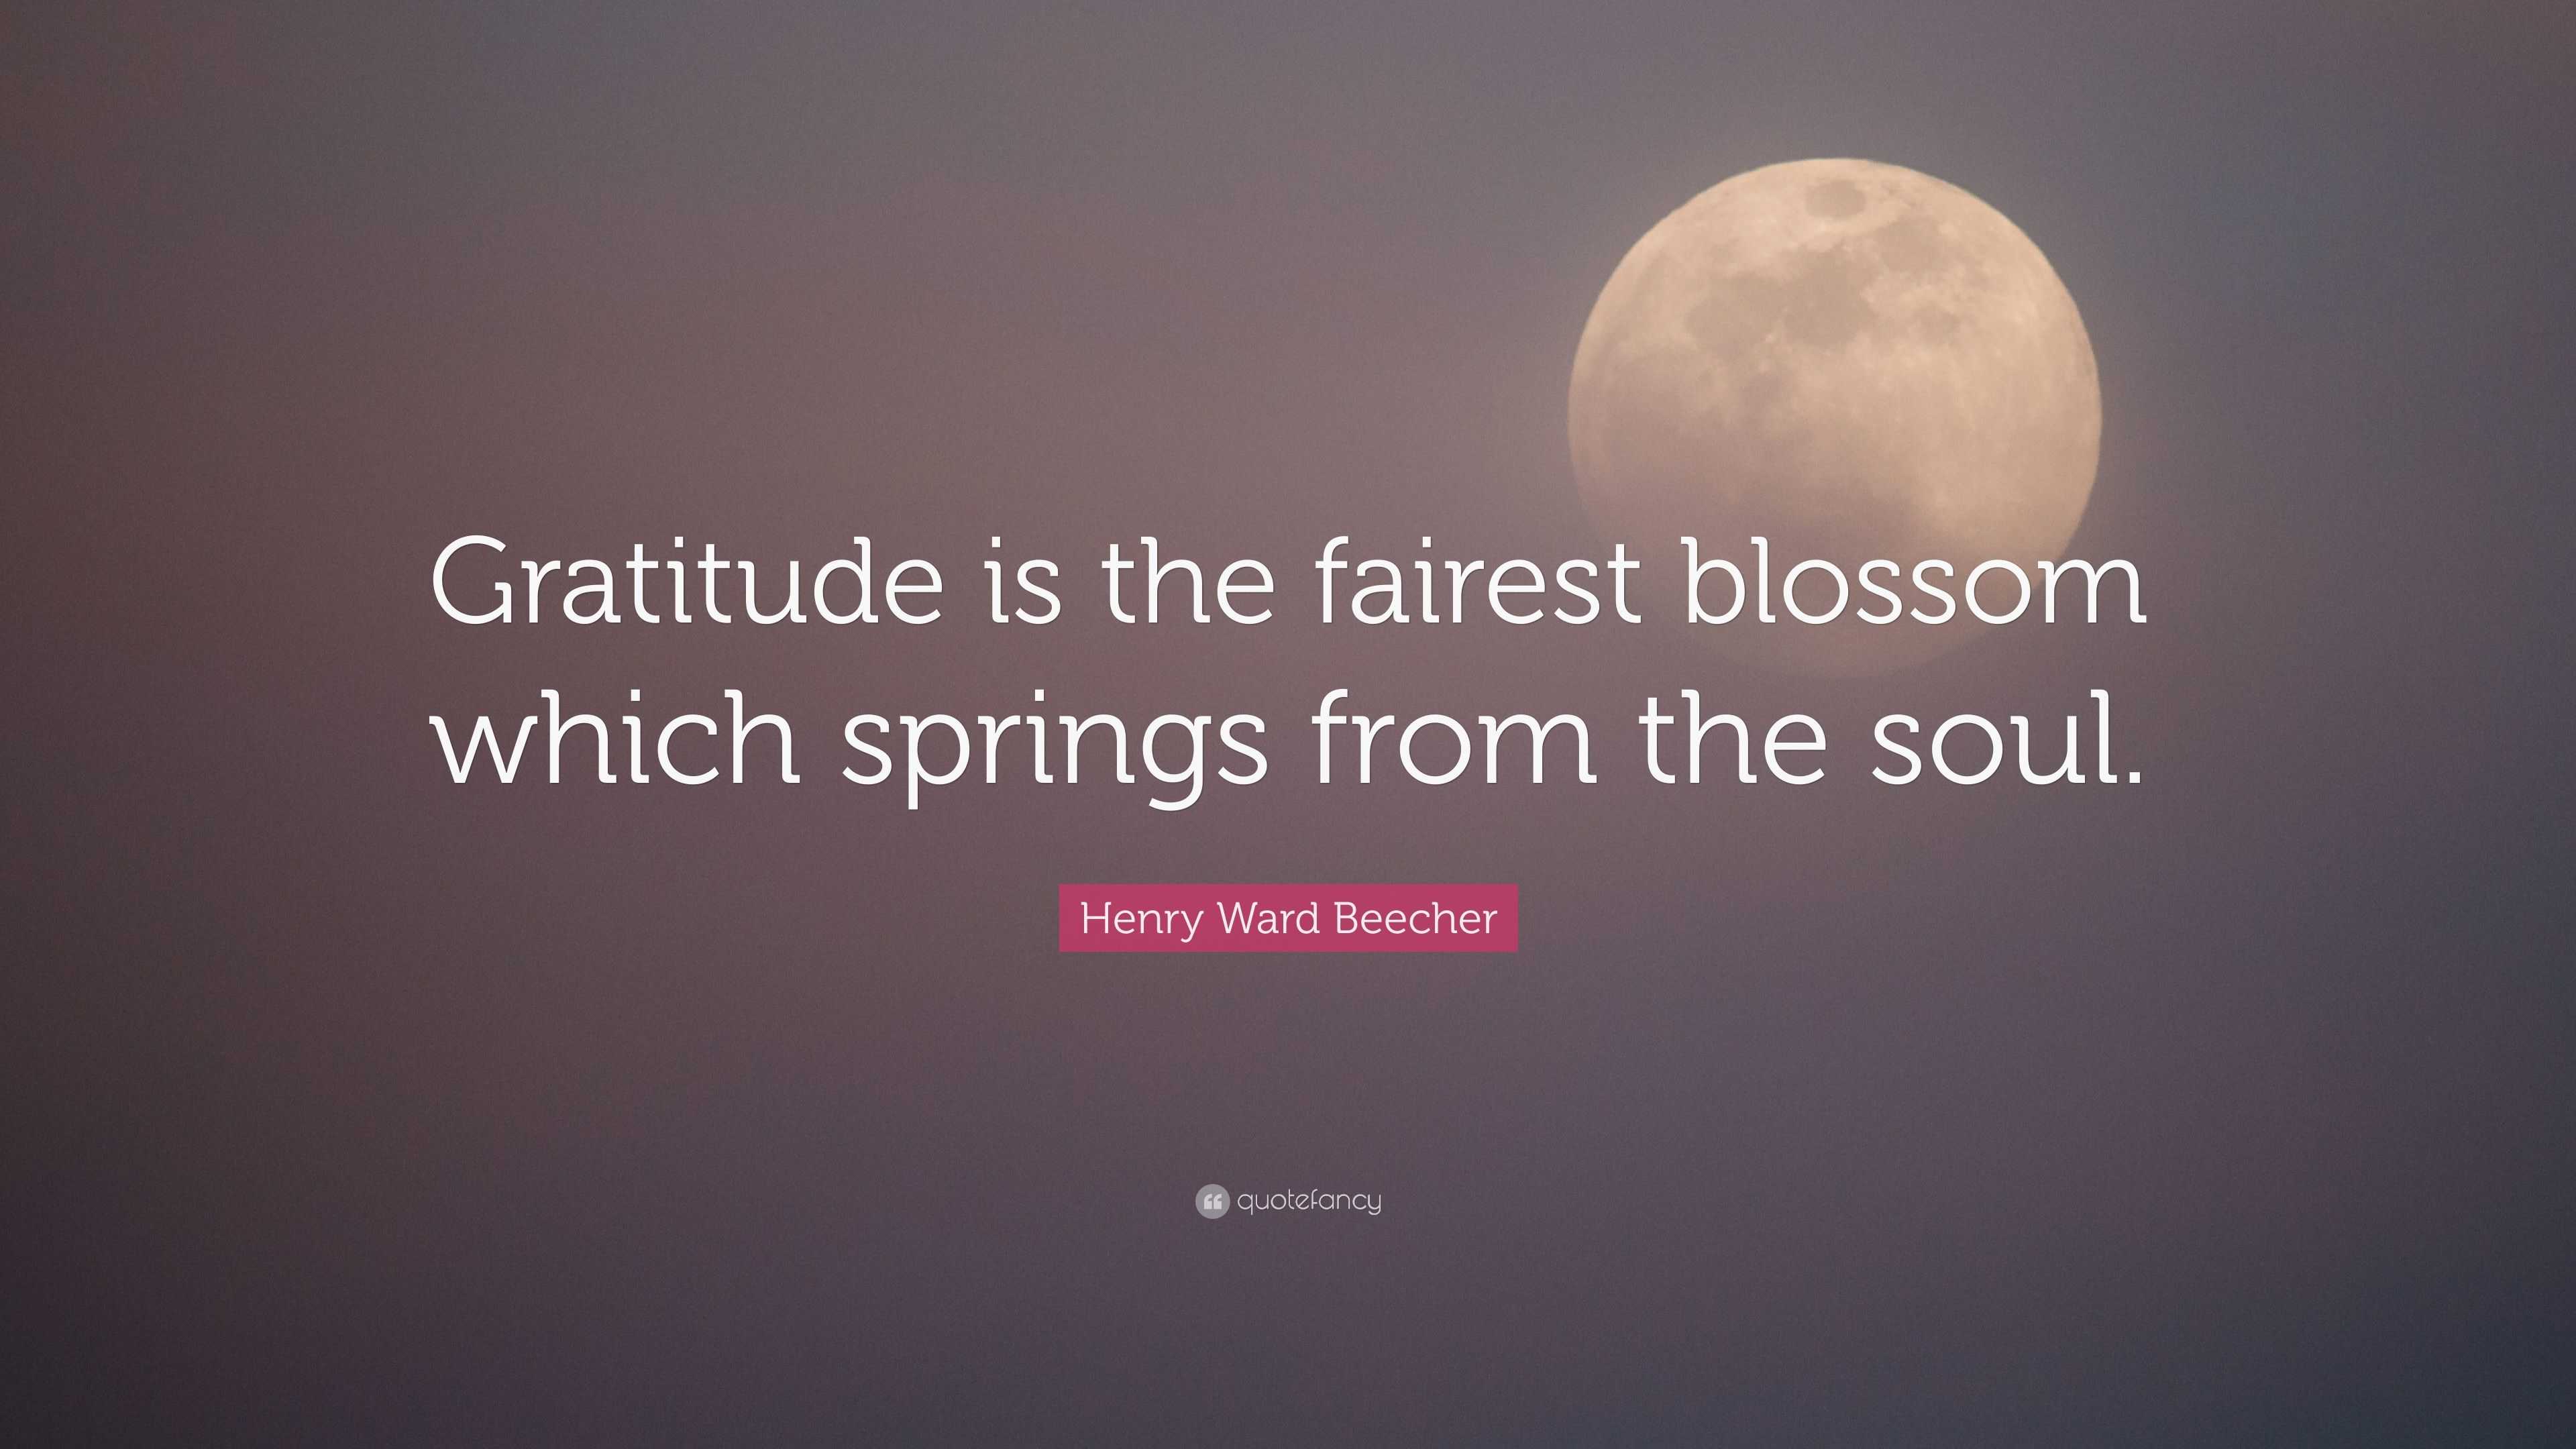 Henry Ward Beecher Quote: “Gratitude is the fairest blossom which ...